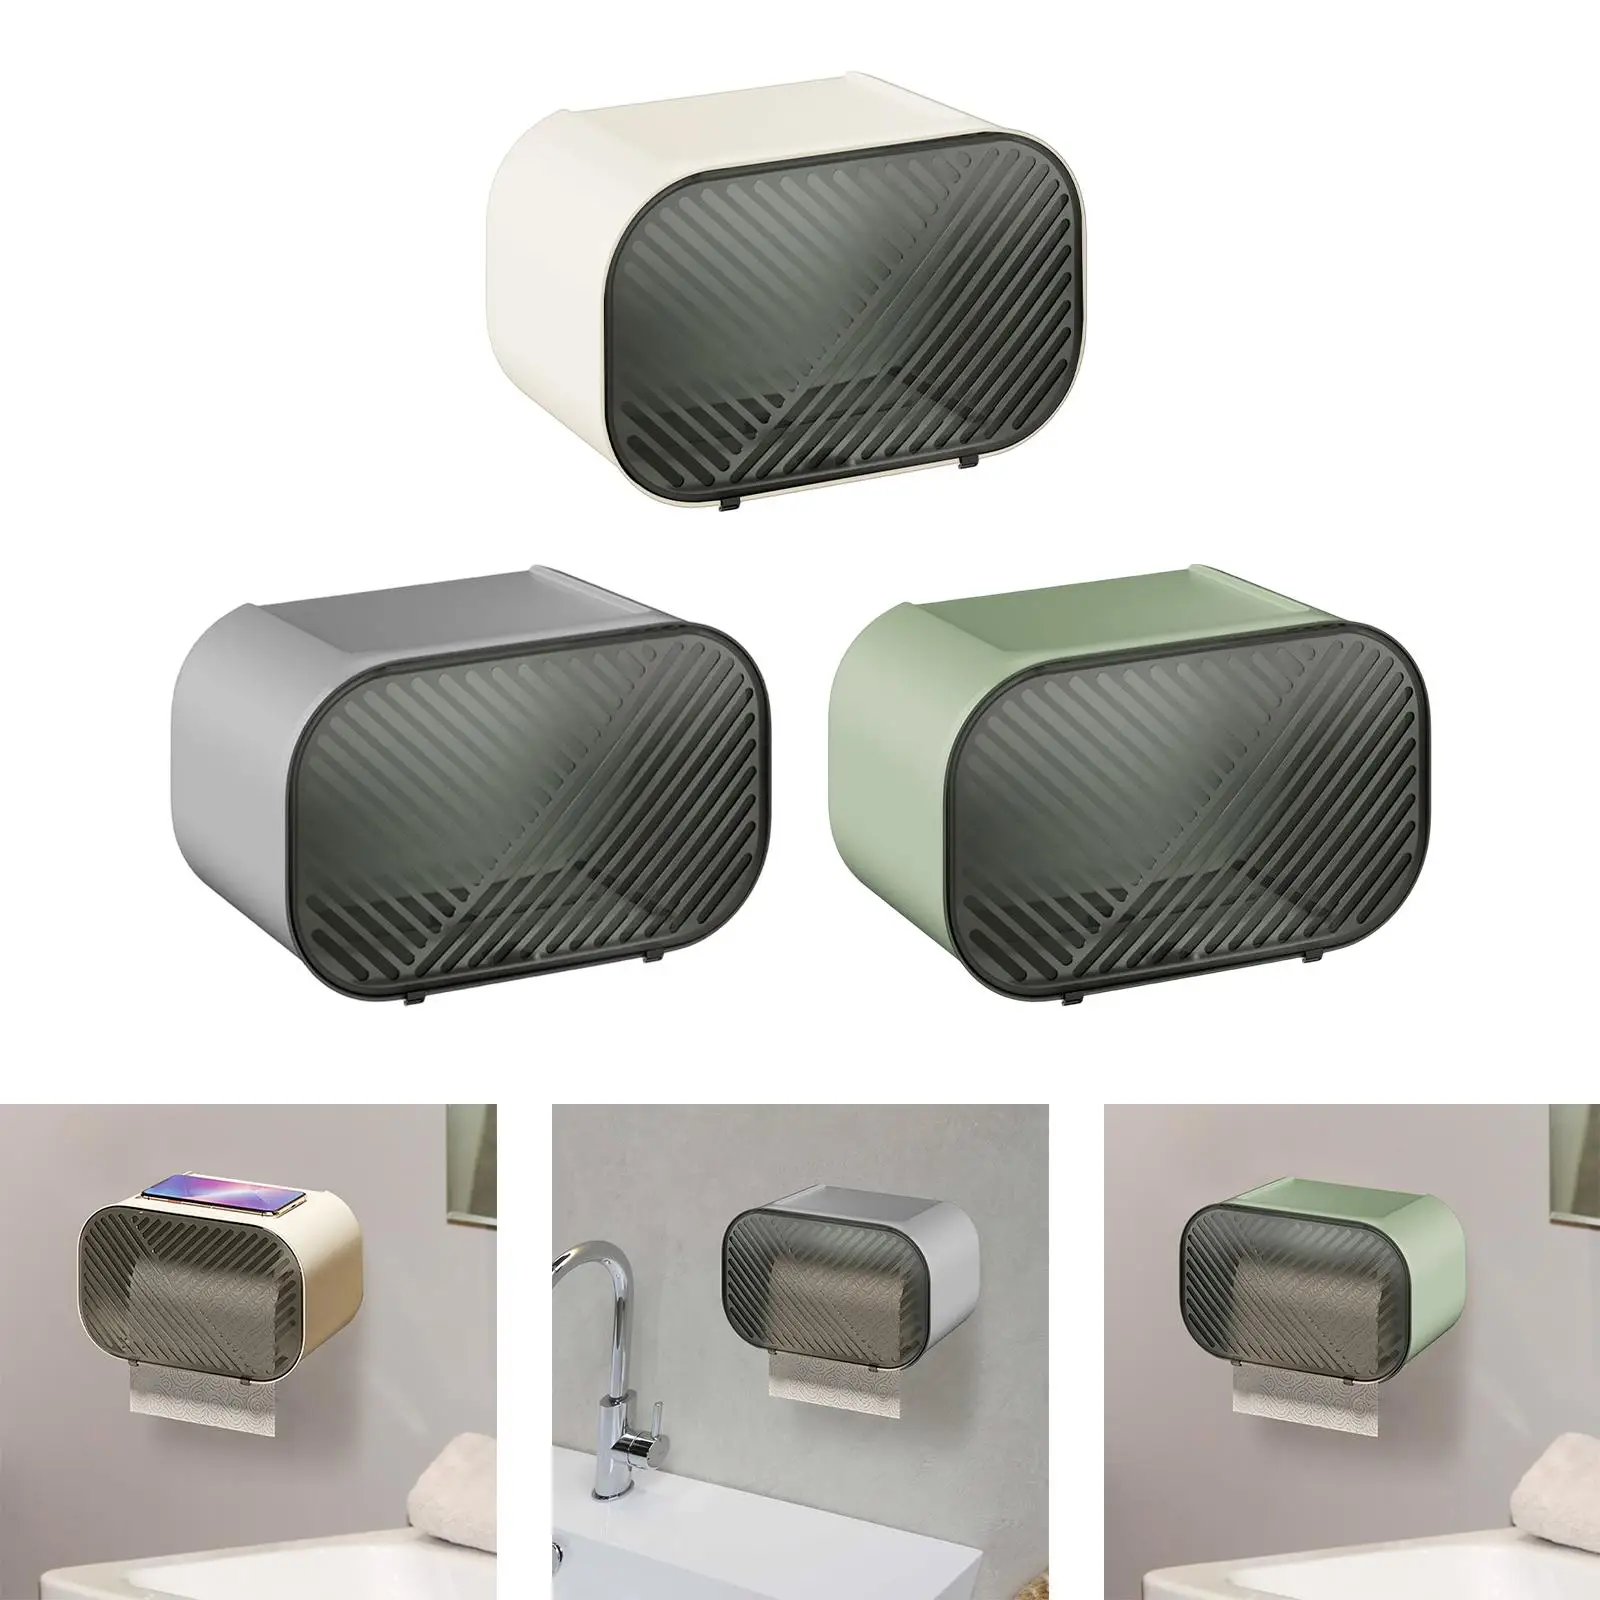 Paper Roll Holder with Shelf Self Adhesive Paper Towel Rack Wall Mount Organizer for Bathroom Countertop Pantry under Cabinet